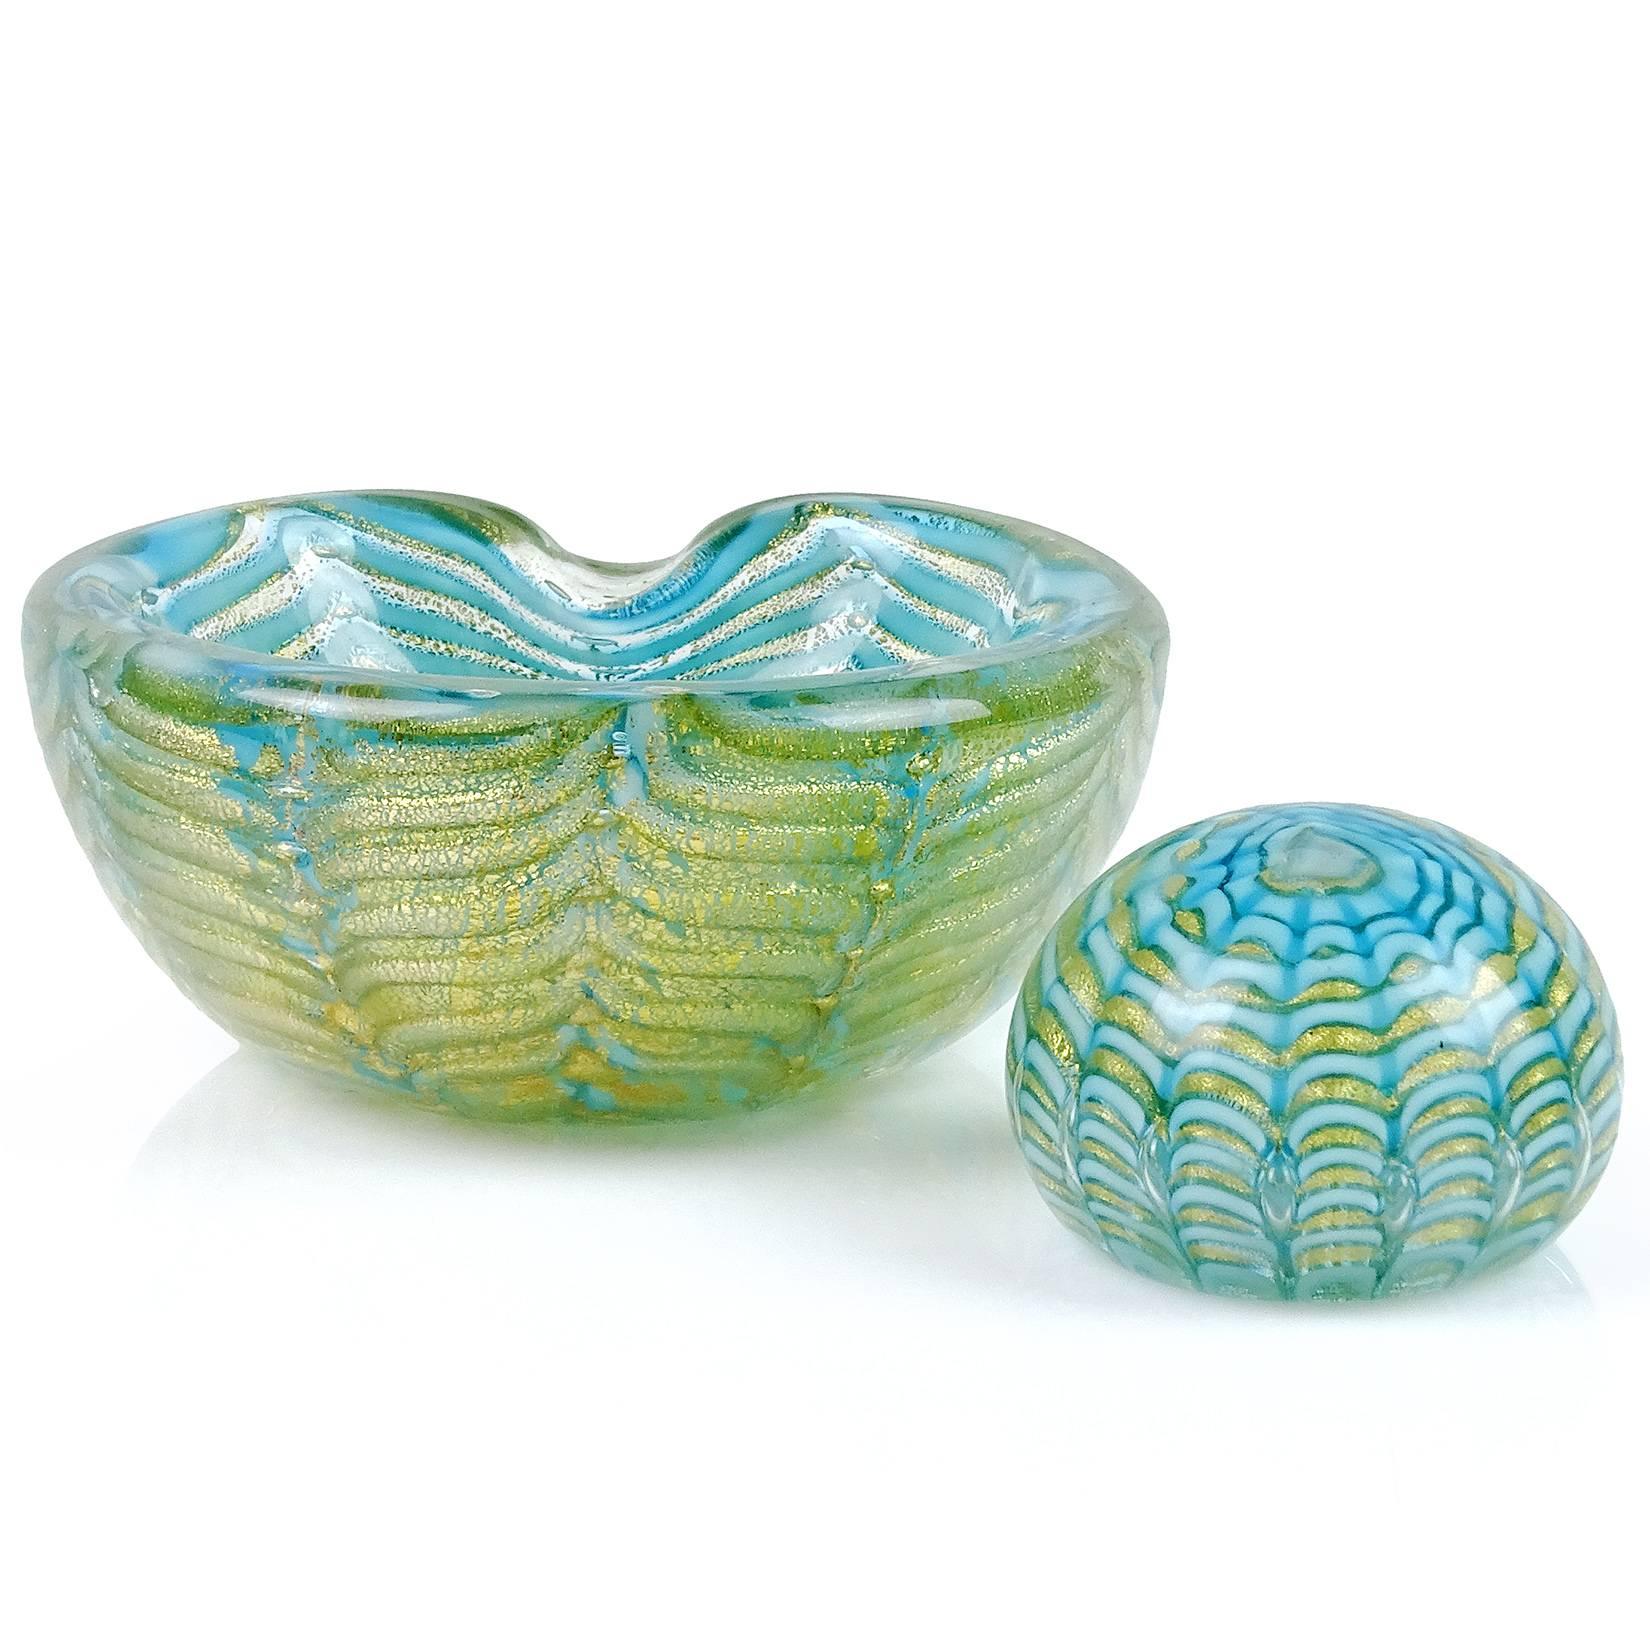 Free shipping worldwide! See details below description.

Beautiful set of Murano handblown blue and heavy gold flecks art glass bowl and paperweight set. Documented to designer Ercole Barovier for Barovier e Toso. Created in the 